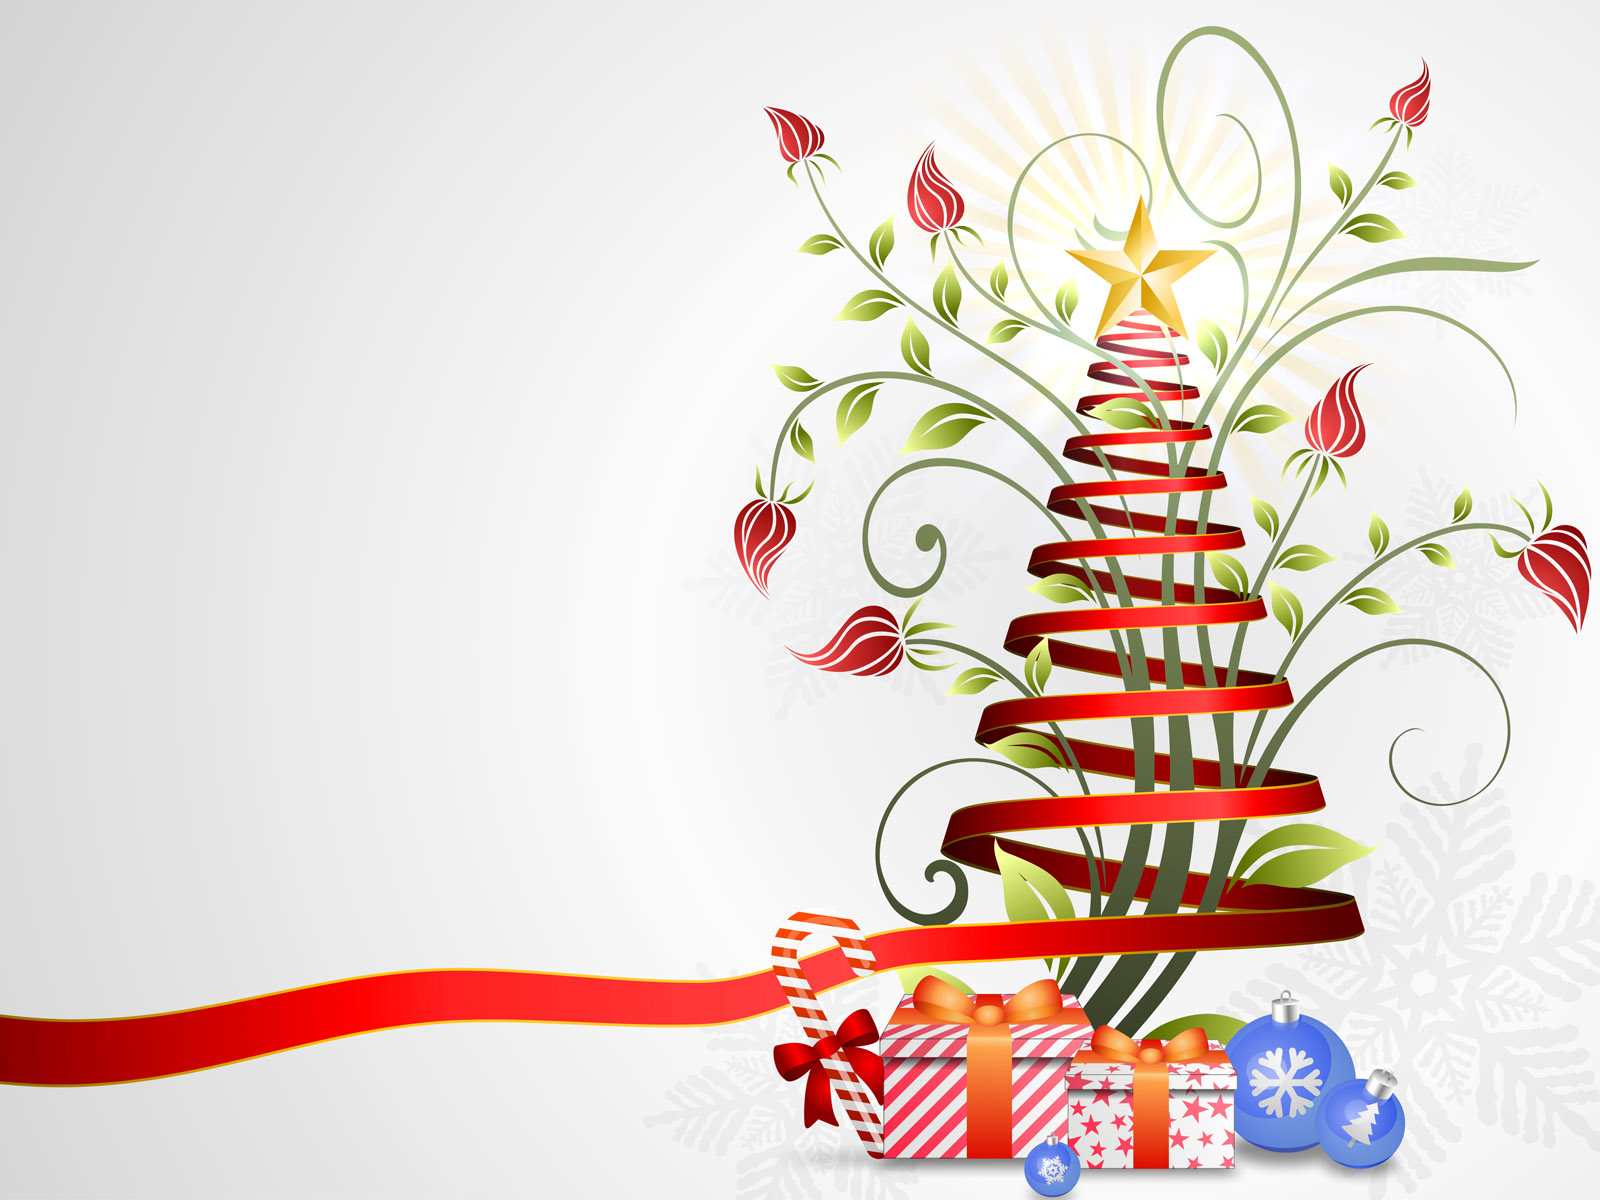 Ribbon Christmas Power Point Backgrounds, Ribbon Christmas Download Power Point Backgrounds ...